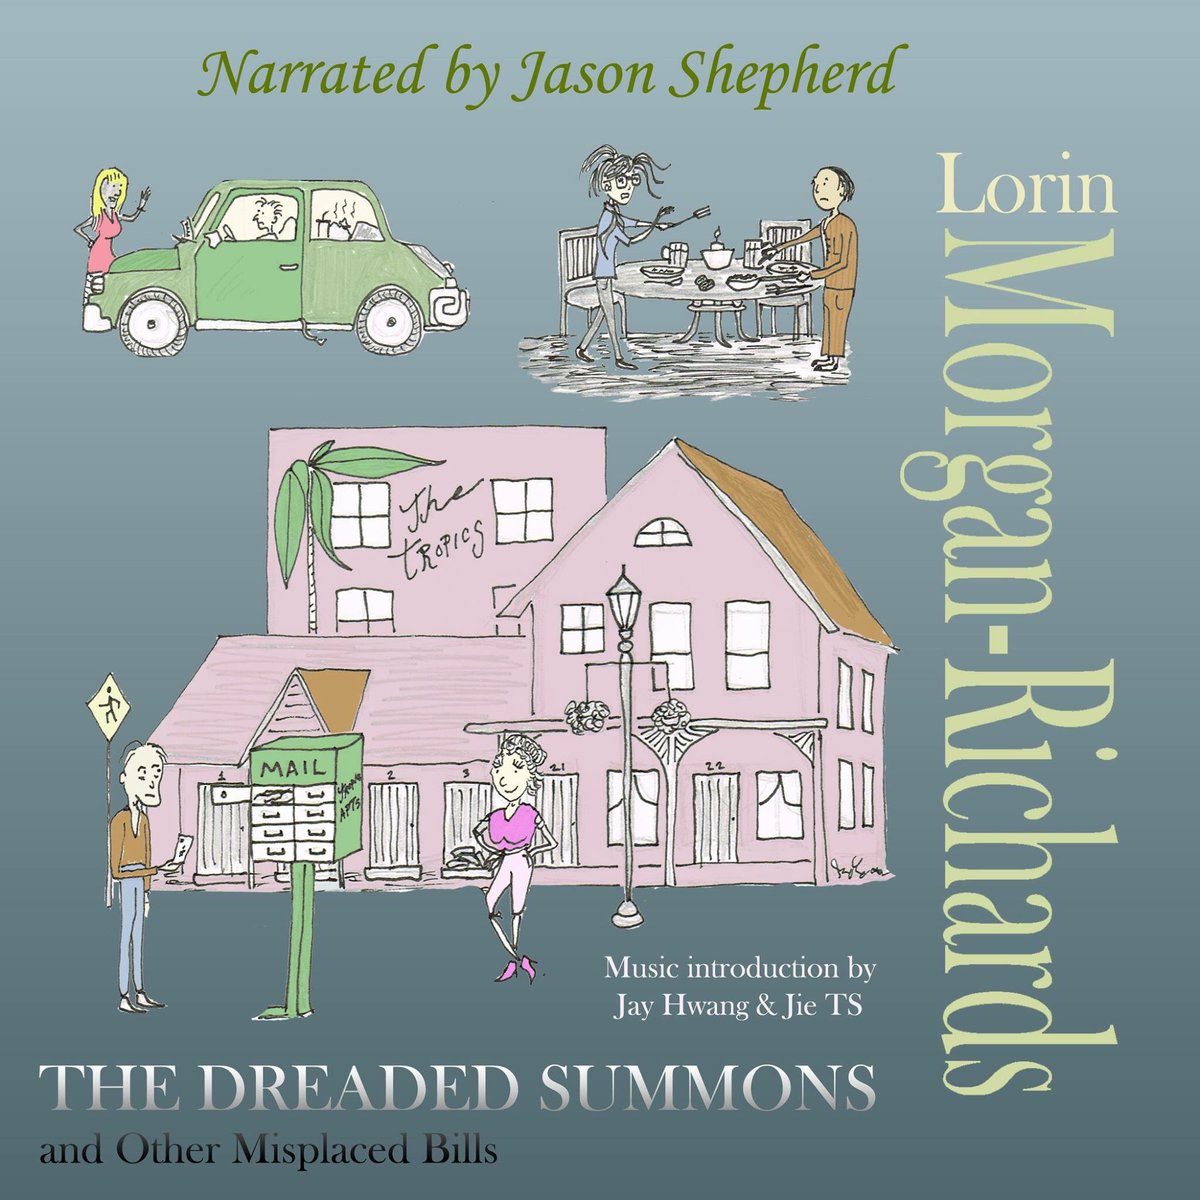 In the coming months I will be releasing the audiobook version of 'The Dreaded Summons and Other Misplaced Bills', narrated by Jason Shepherd and with a special music introduction from Jay Hwang and Jie TS #audiobook #childrensbook #childrensaudiobook #youngadultfiction #